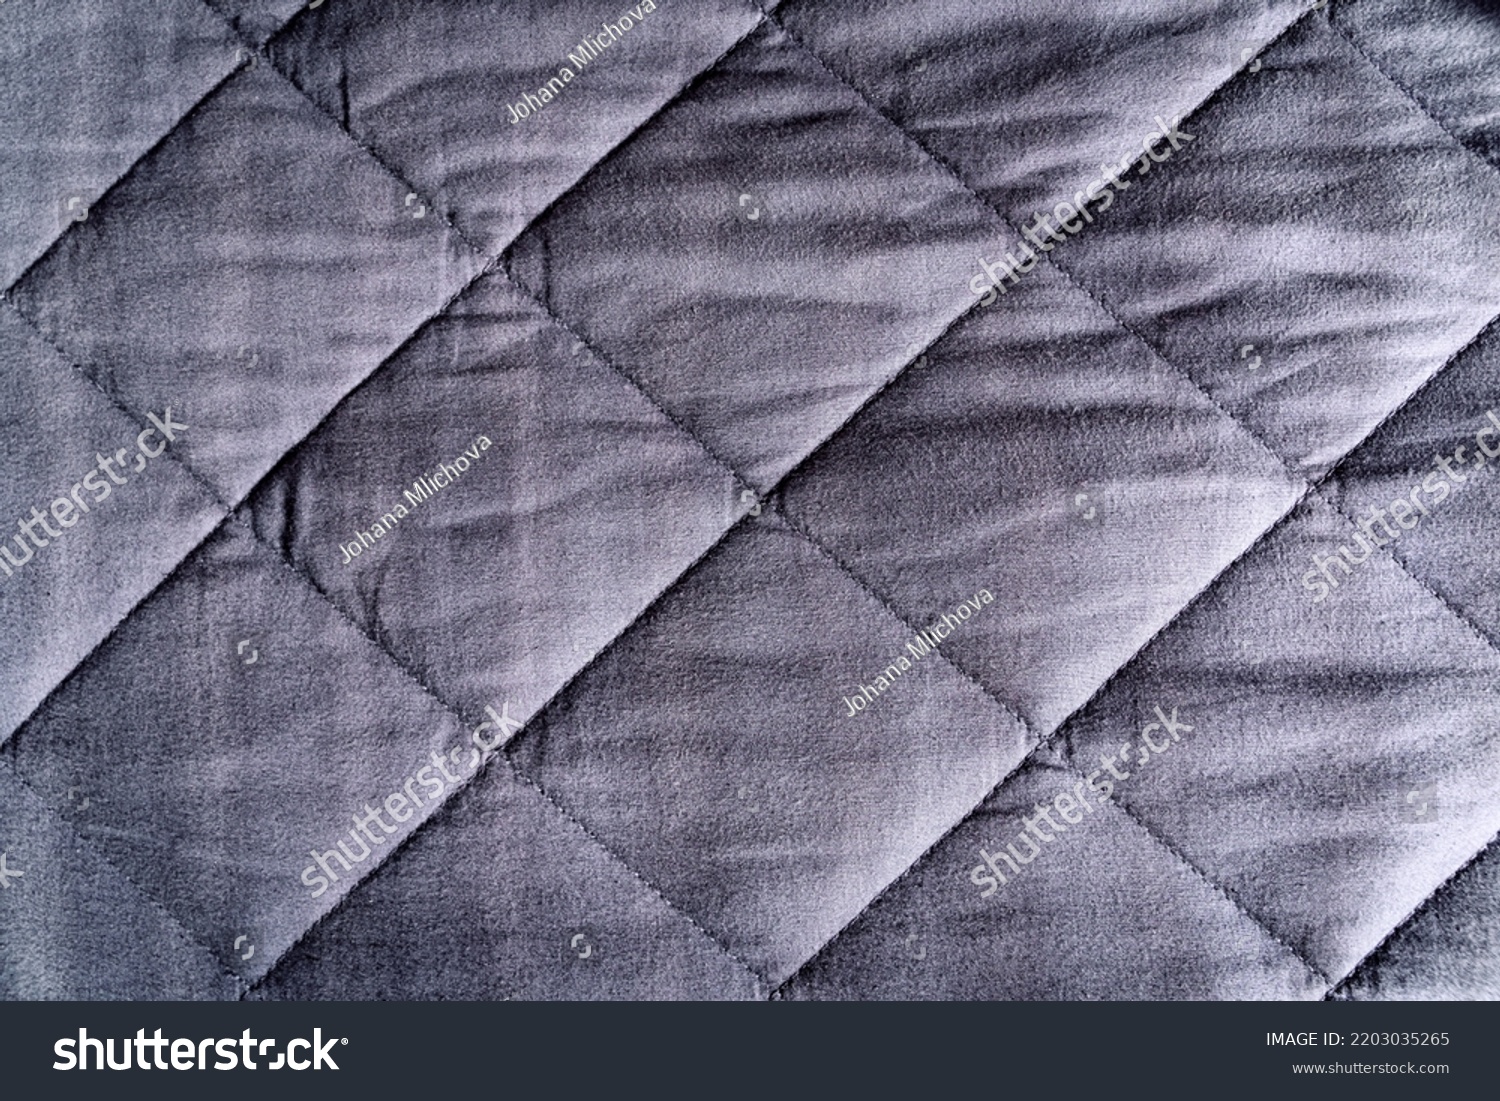 Grey blue weighted blanket texture detail, heavy padded relaxing bed sheet cover filled with glass beads #2203035265